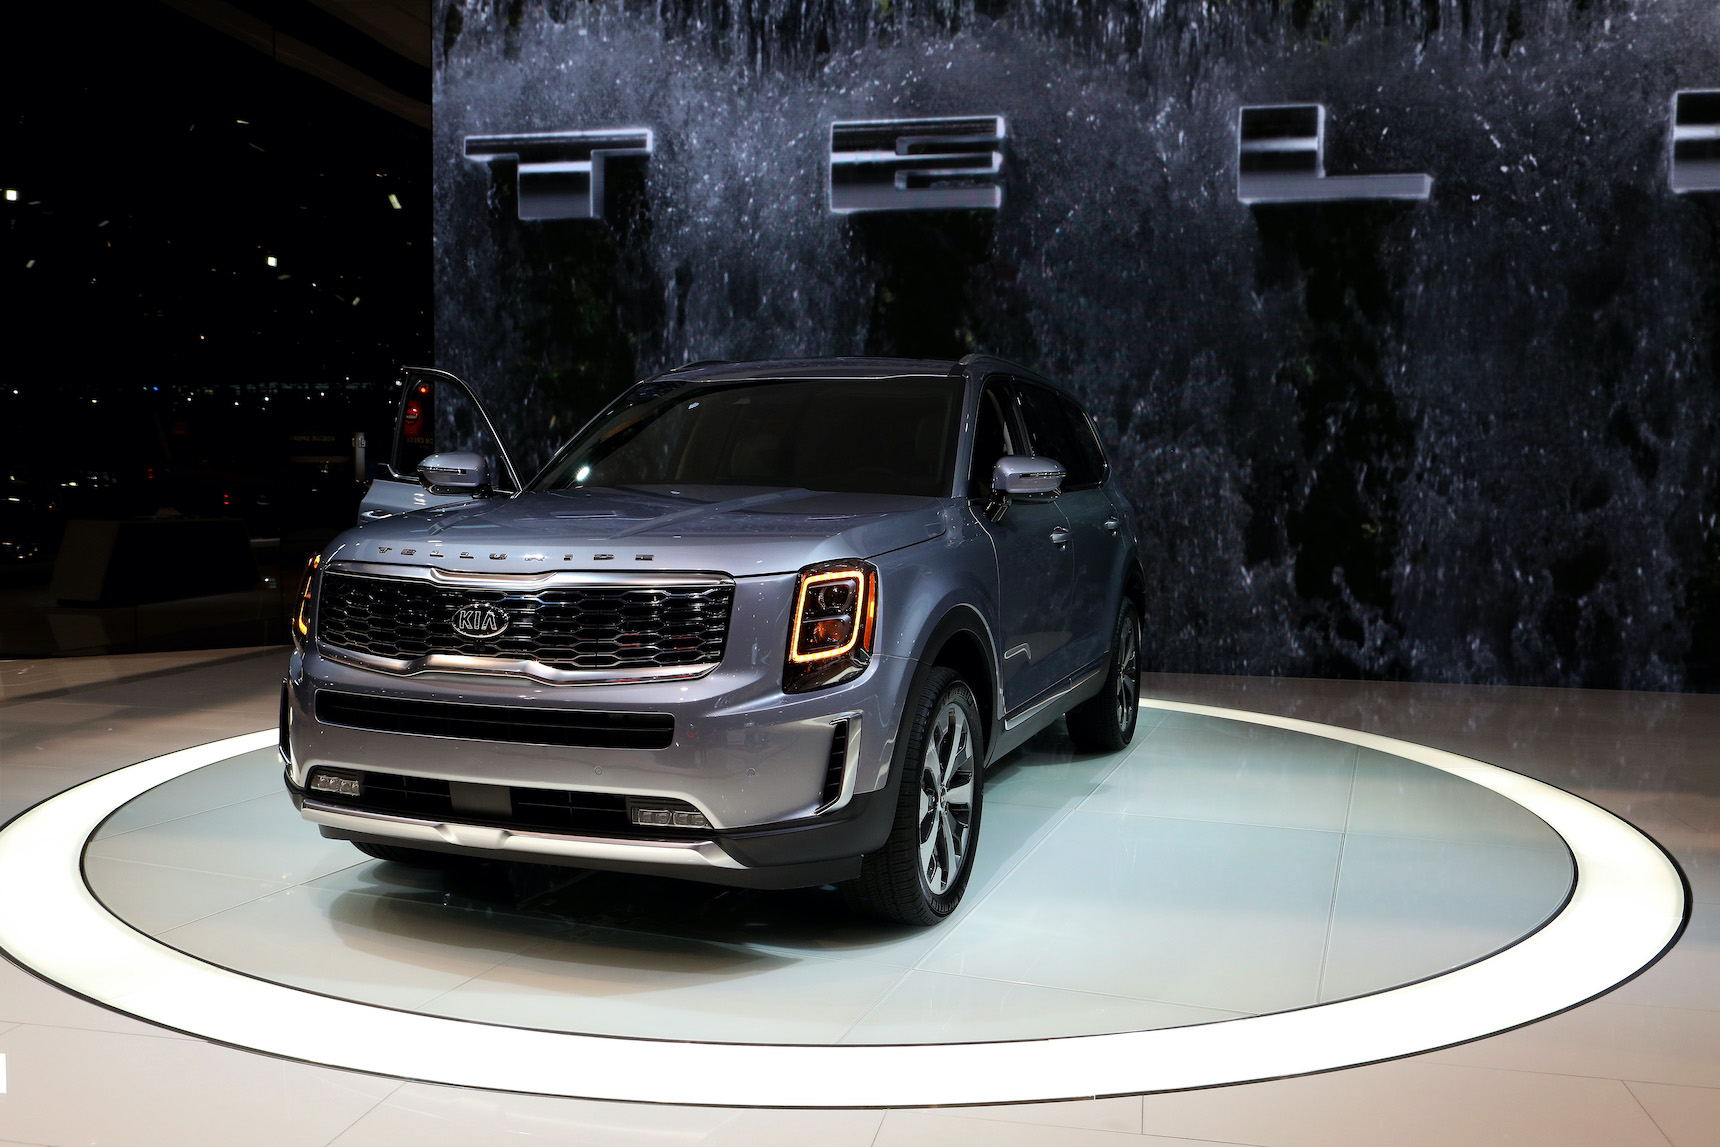 The 2020 Telluride is on display at the 111th Annual Chicago Auto Show